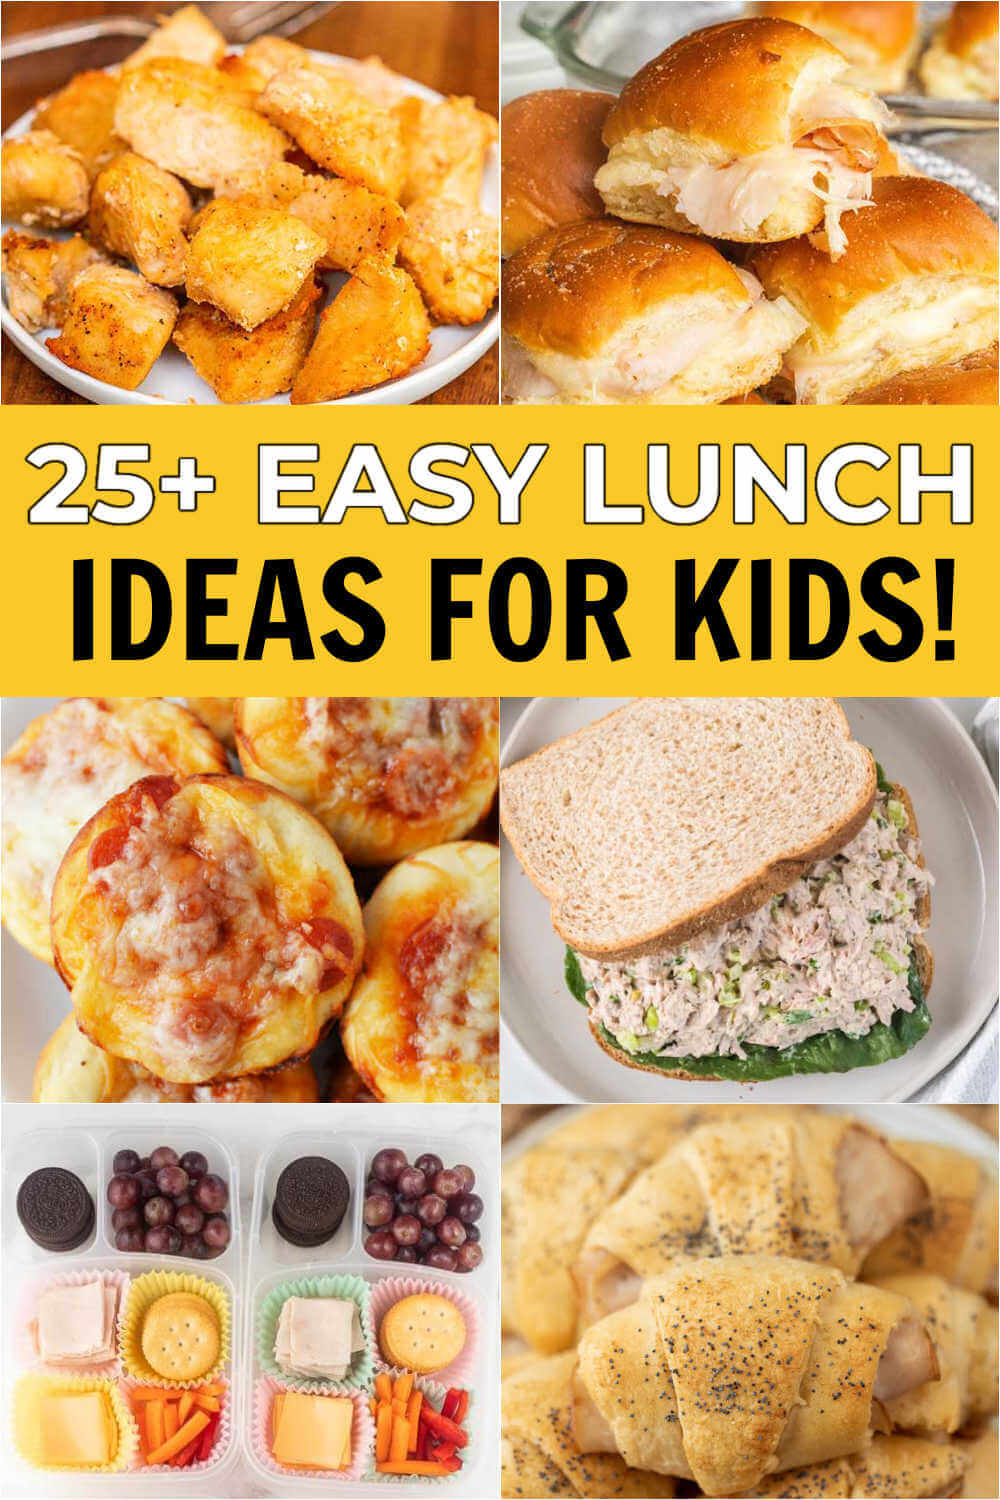 quick-easy-lunch-ideas-for-a-group-best-design-idea